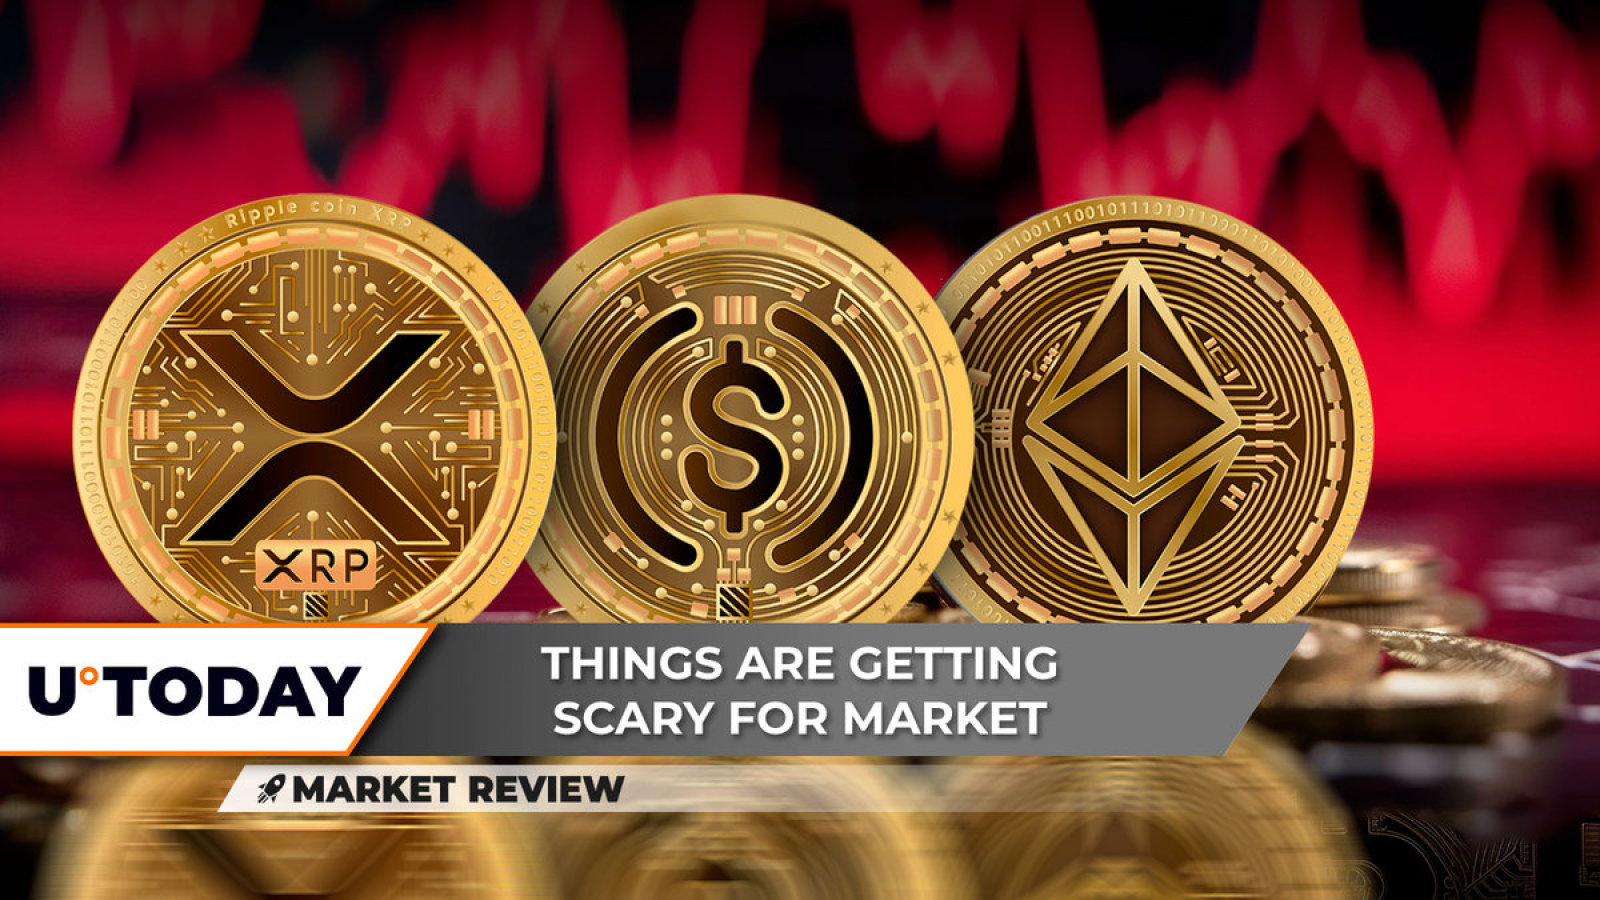 XRP Breaks Down In Severe Manner, Golden Cross on DXY Pushes Doom On Market, Ethereum (ETH) To Land On Crucial Support